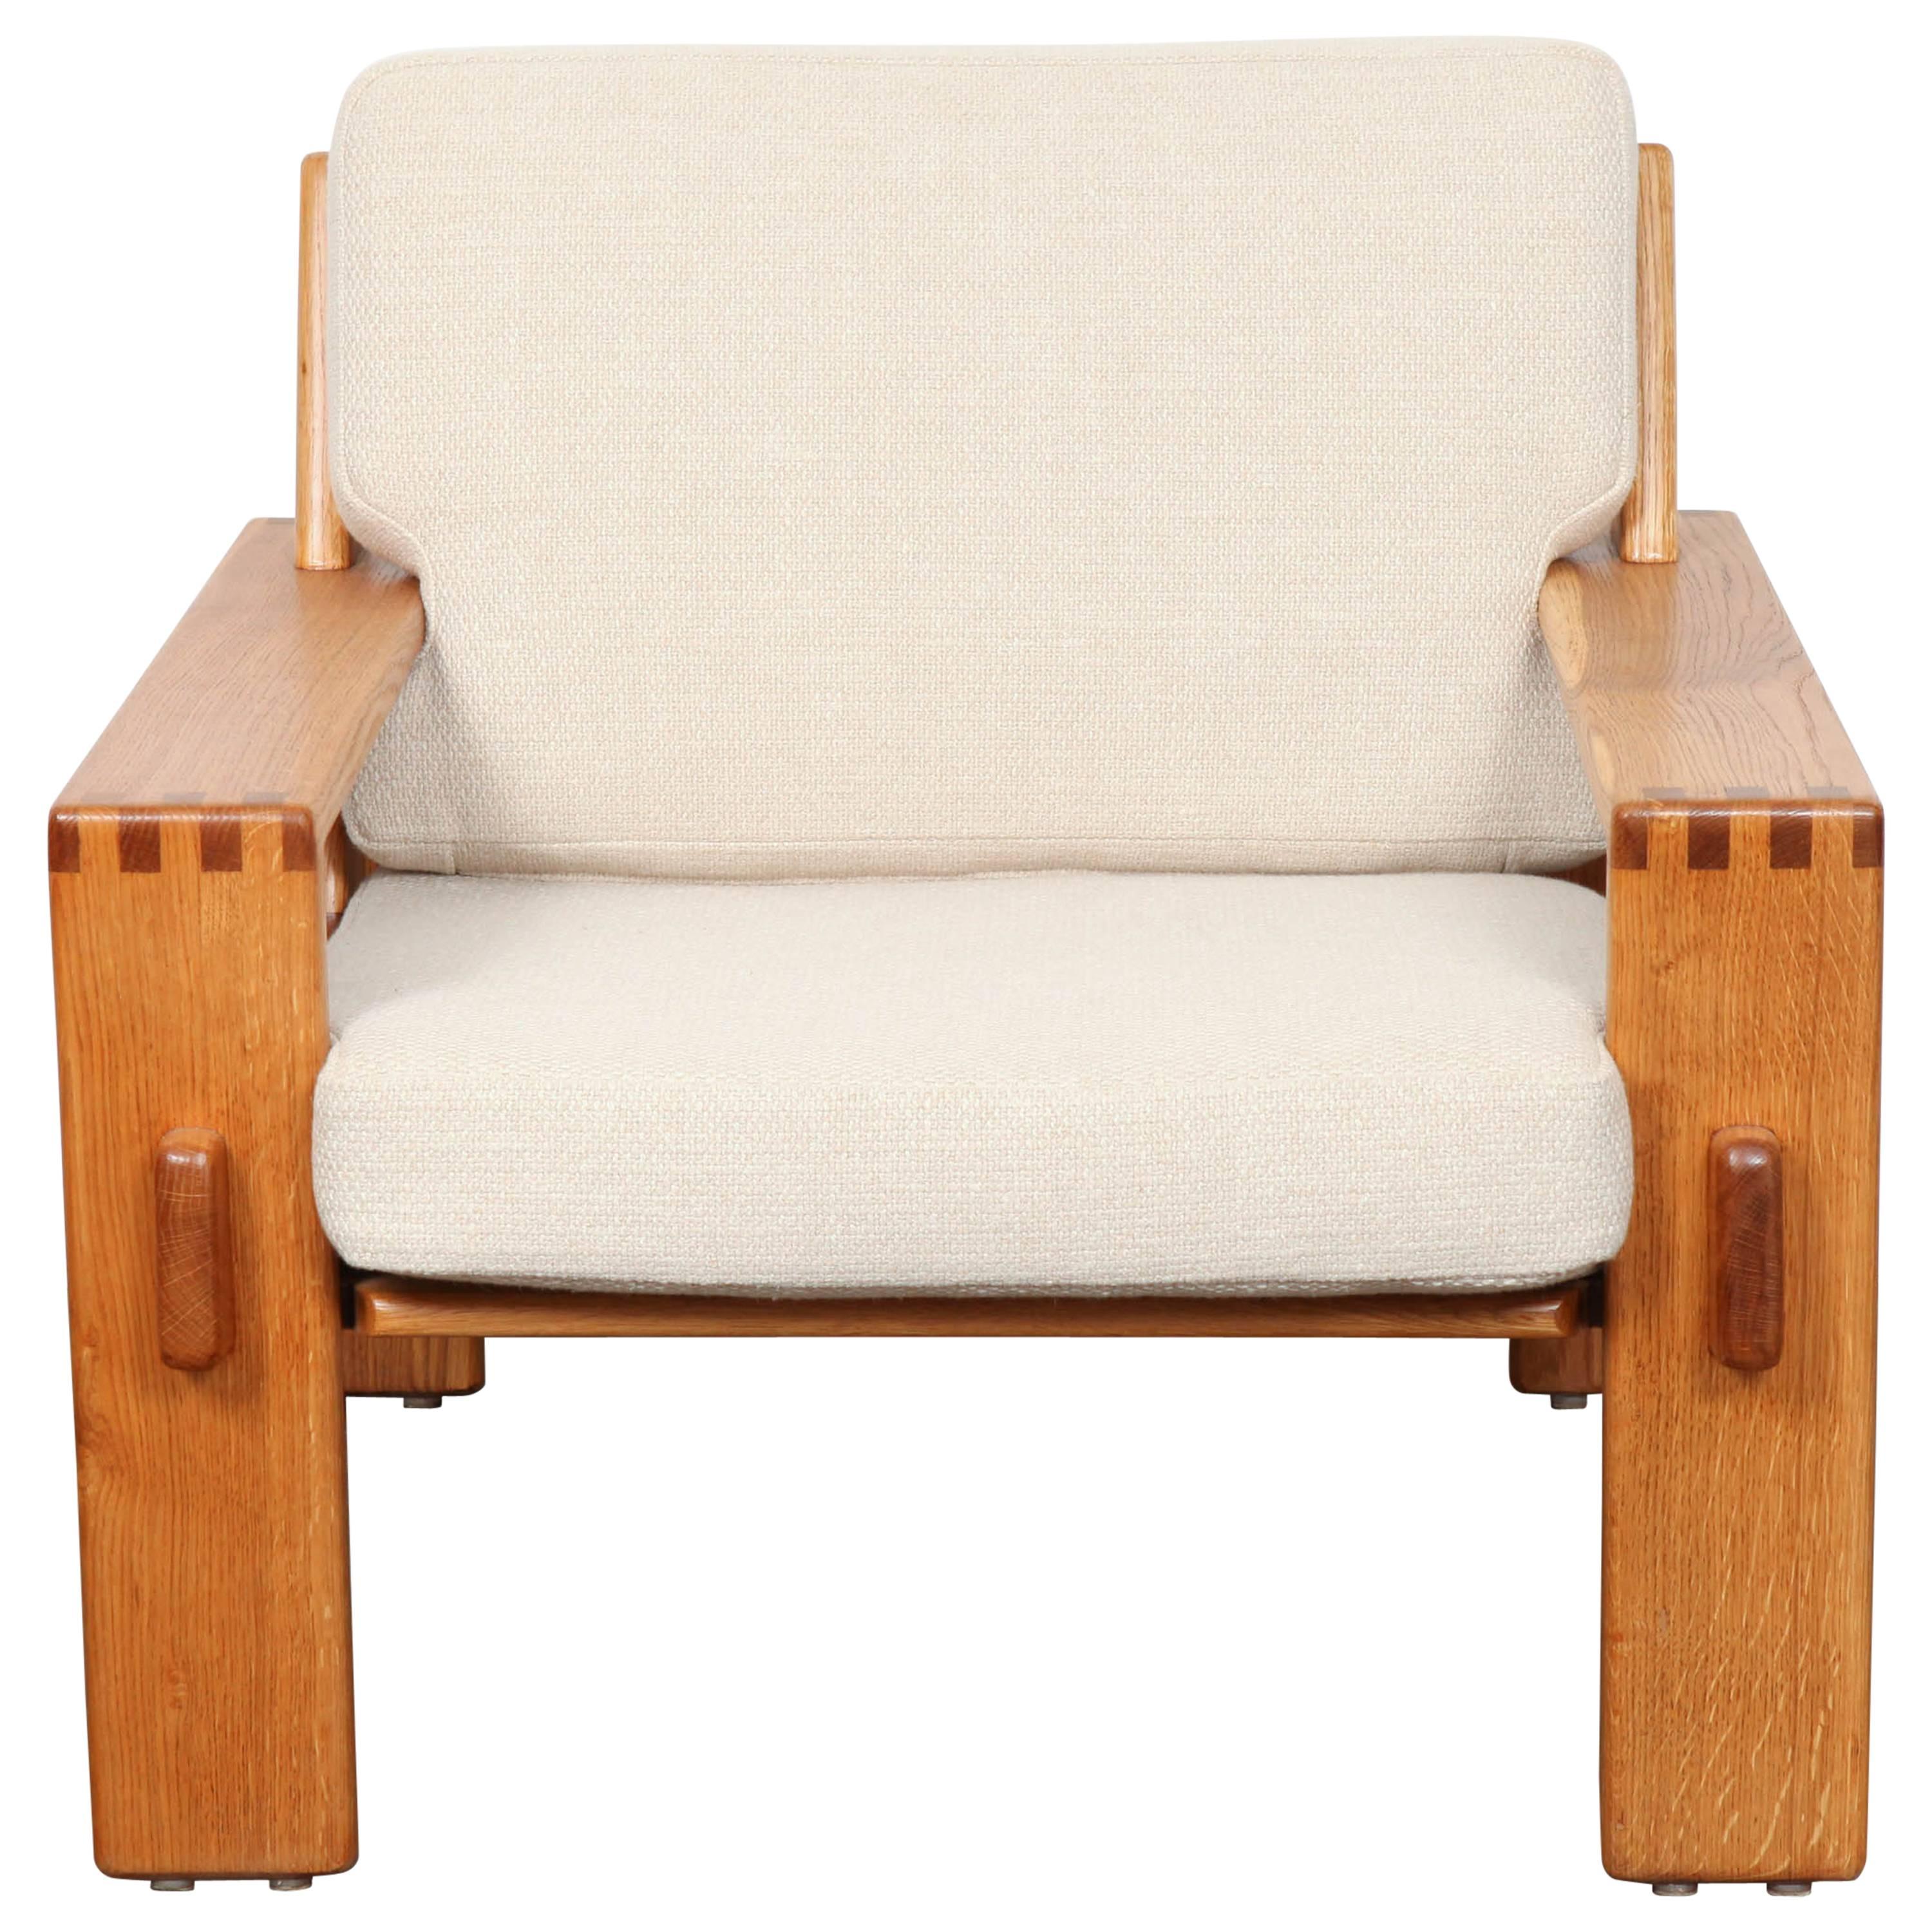 Oak framed chair designed by Esko Pajamies, newly upholstered in a crème colored Belgian bouclé fabric, Finland, 1970s. Newly lacquered.